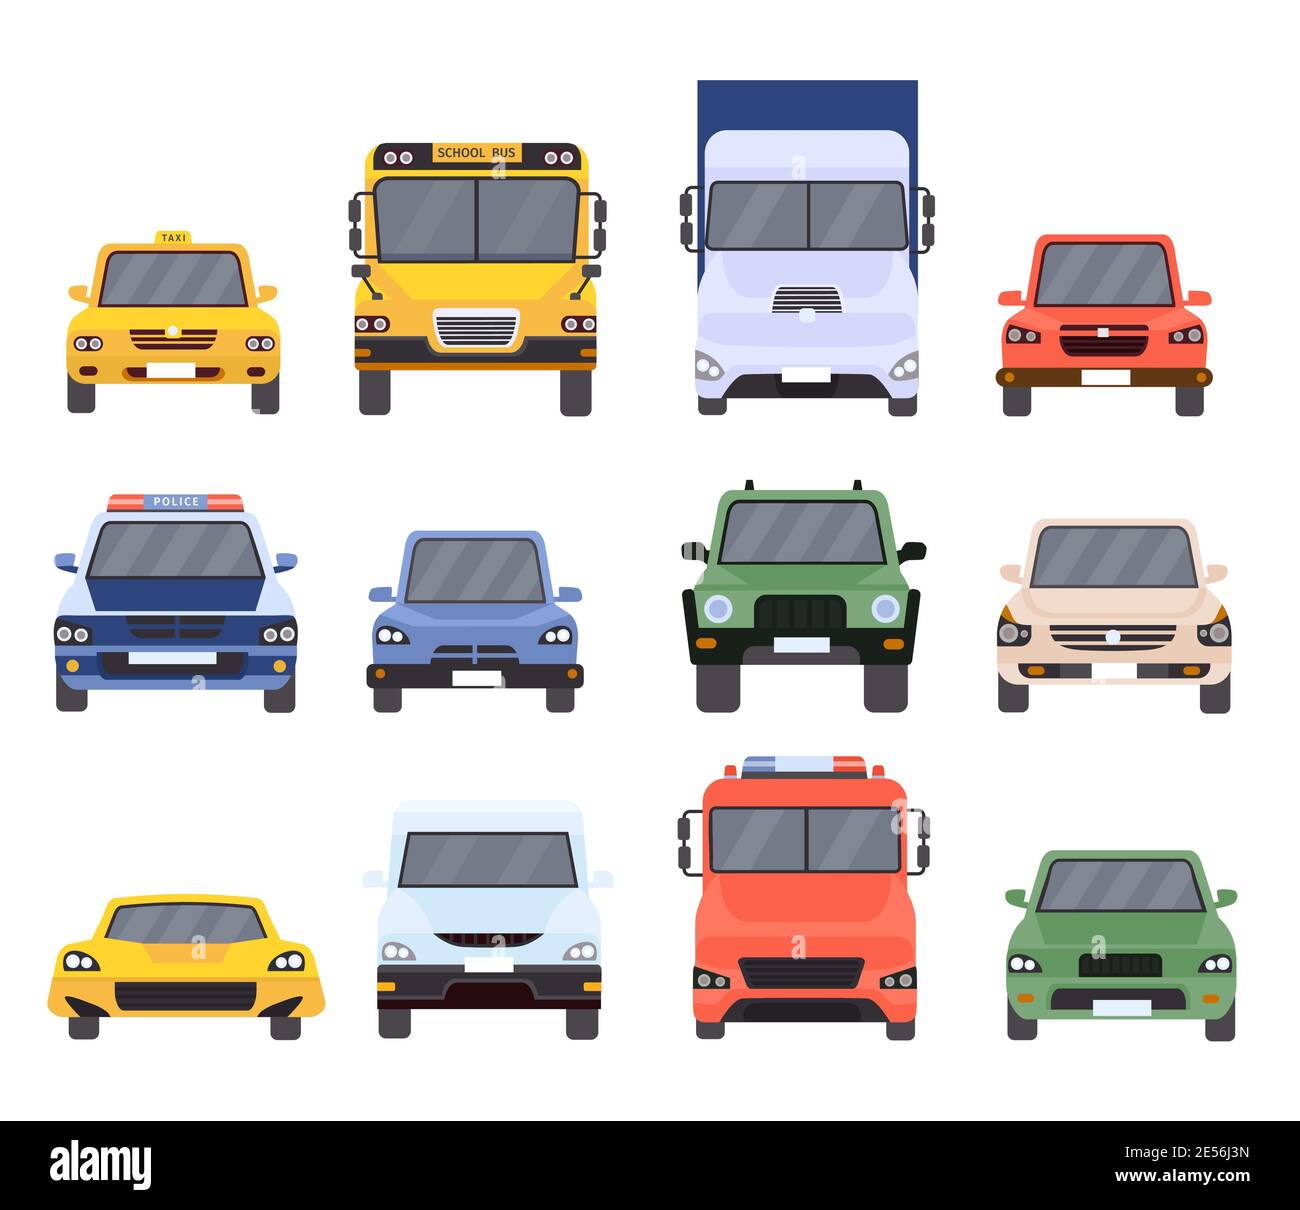 Cars front view. Flat urban vehicles taxi, police, delivery service, school bus, van, truck and sport vehicle. Cartoon car model vector set Stock Vector